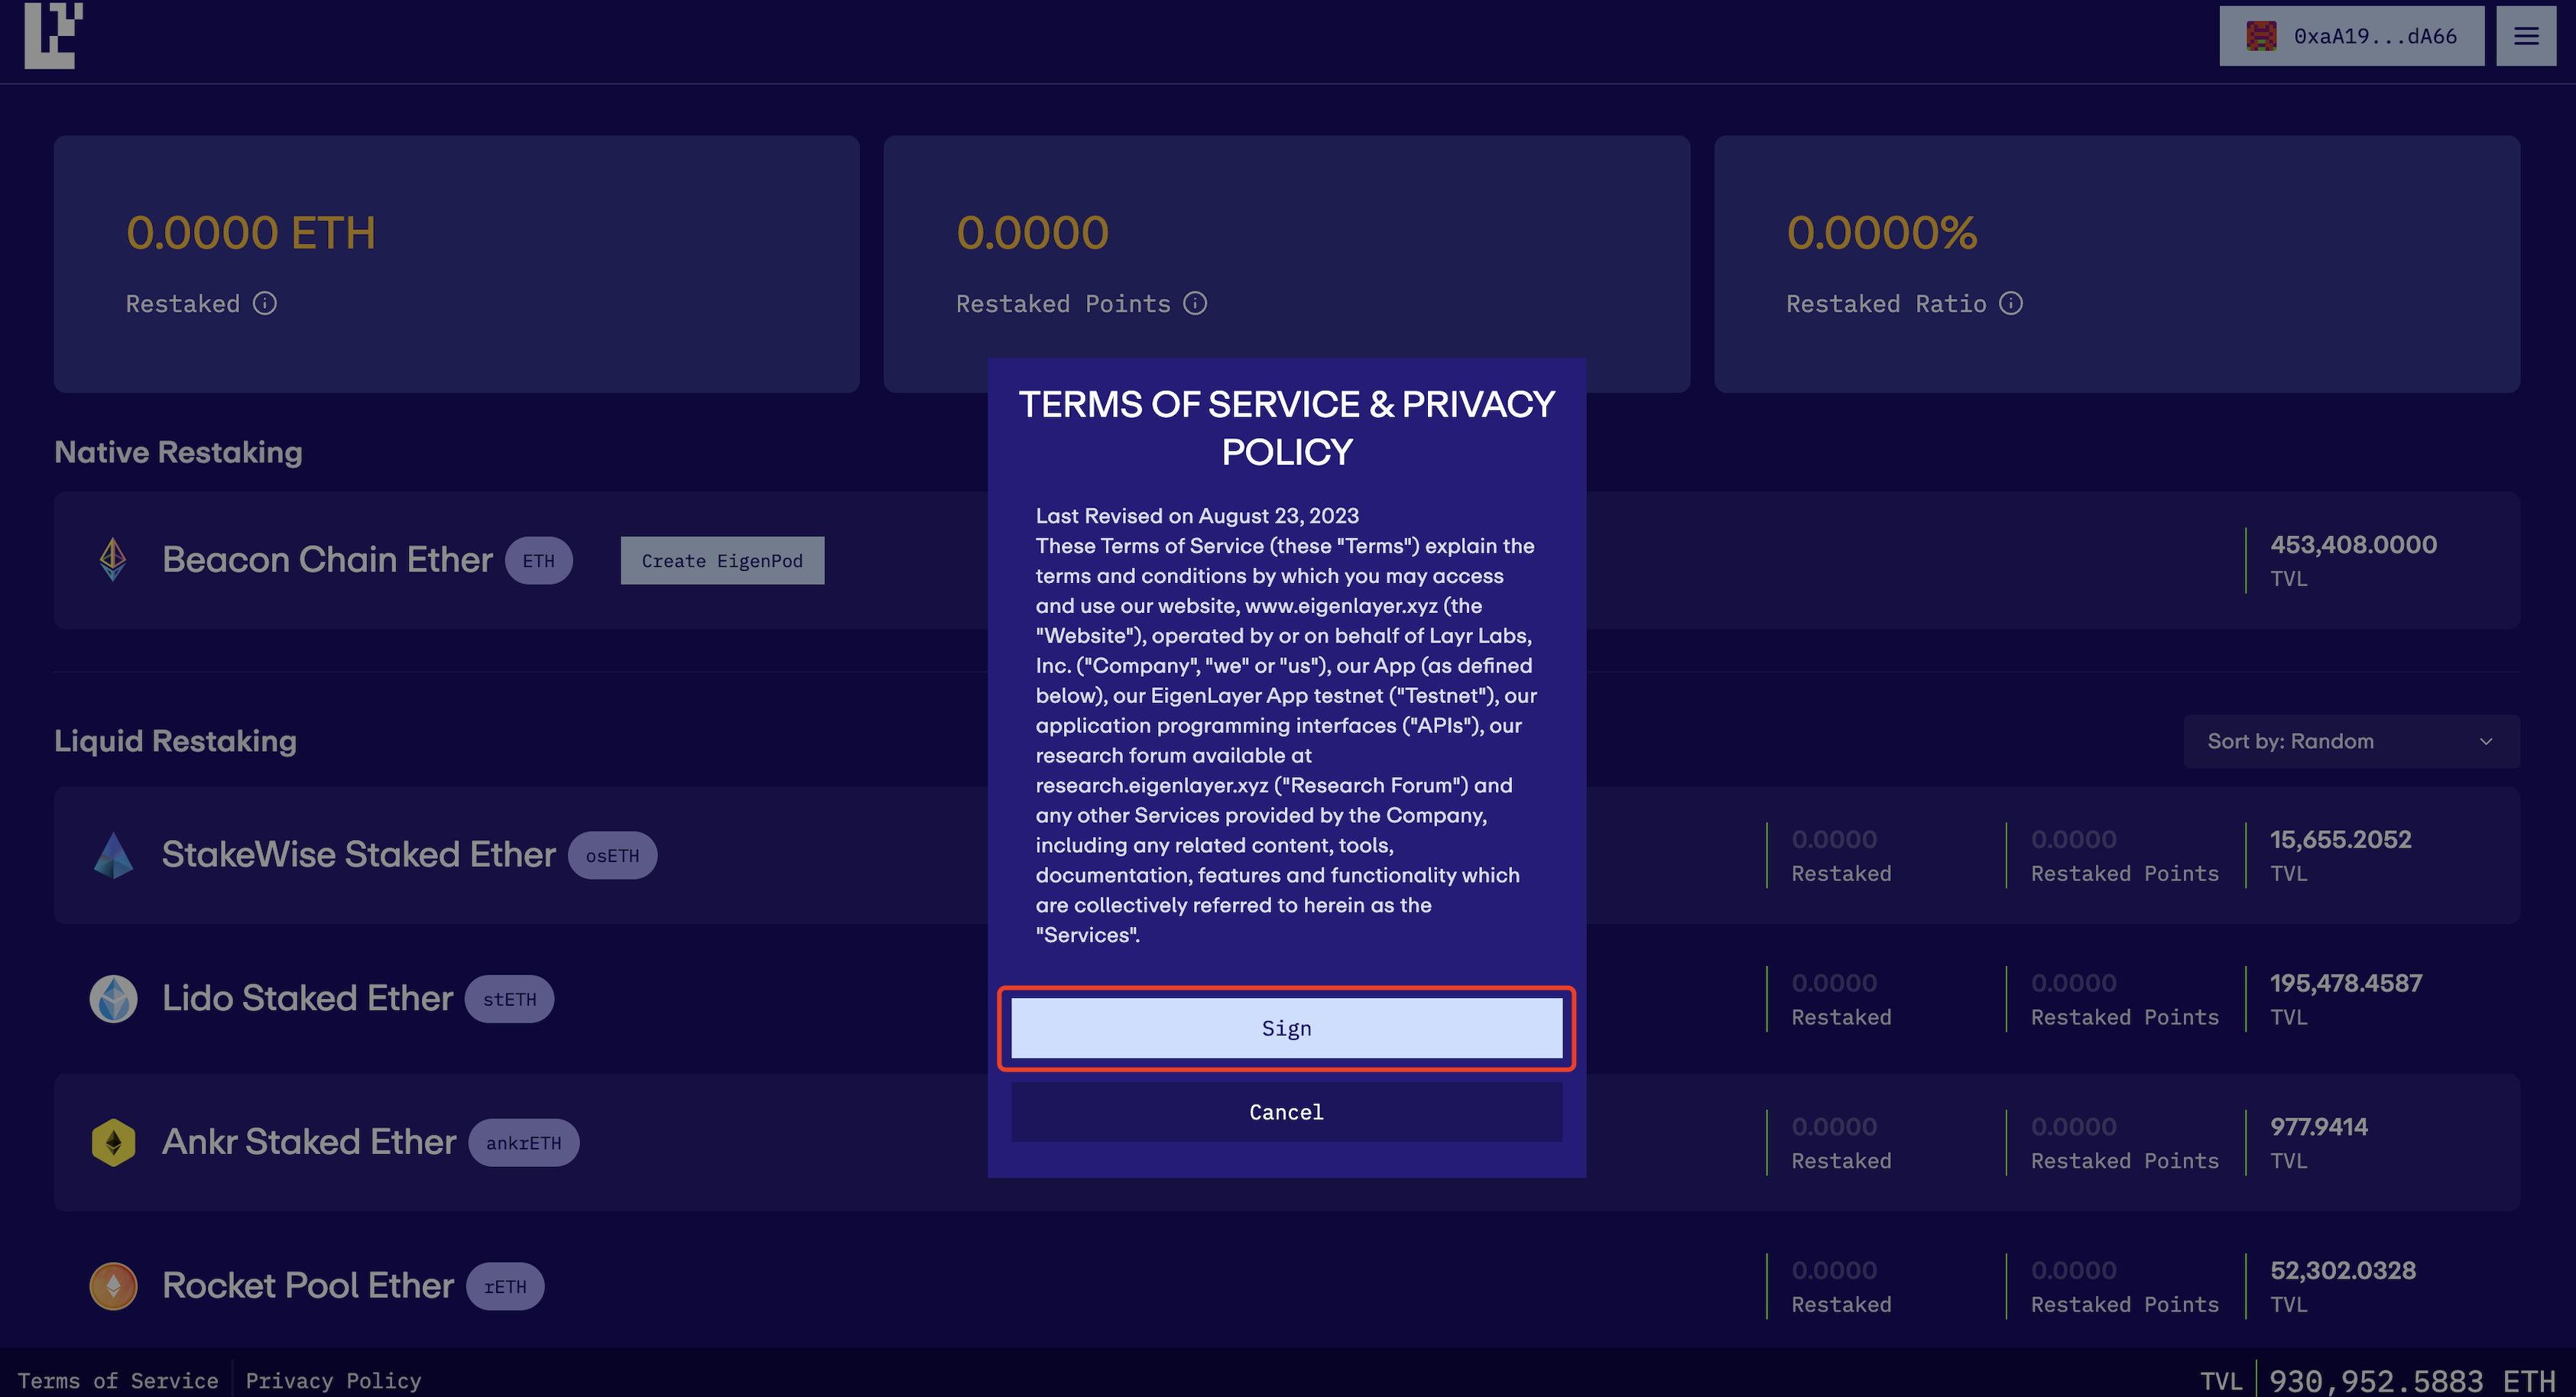 You can click “sign” to indicate your agreement. It's important to note that this is an off-chain action, processed through your Transaction Authorization Policy (TAP), and does not engage with the blockchain directly.